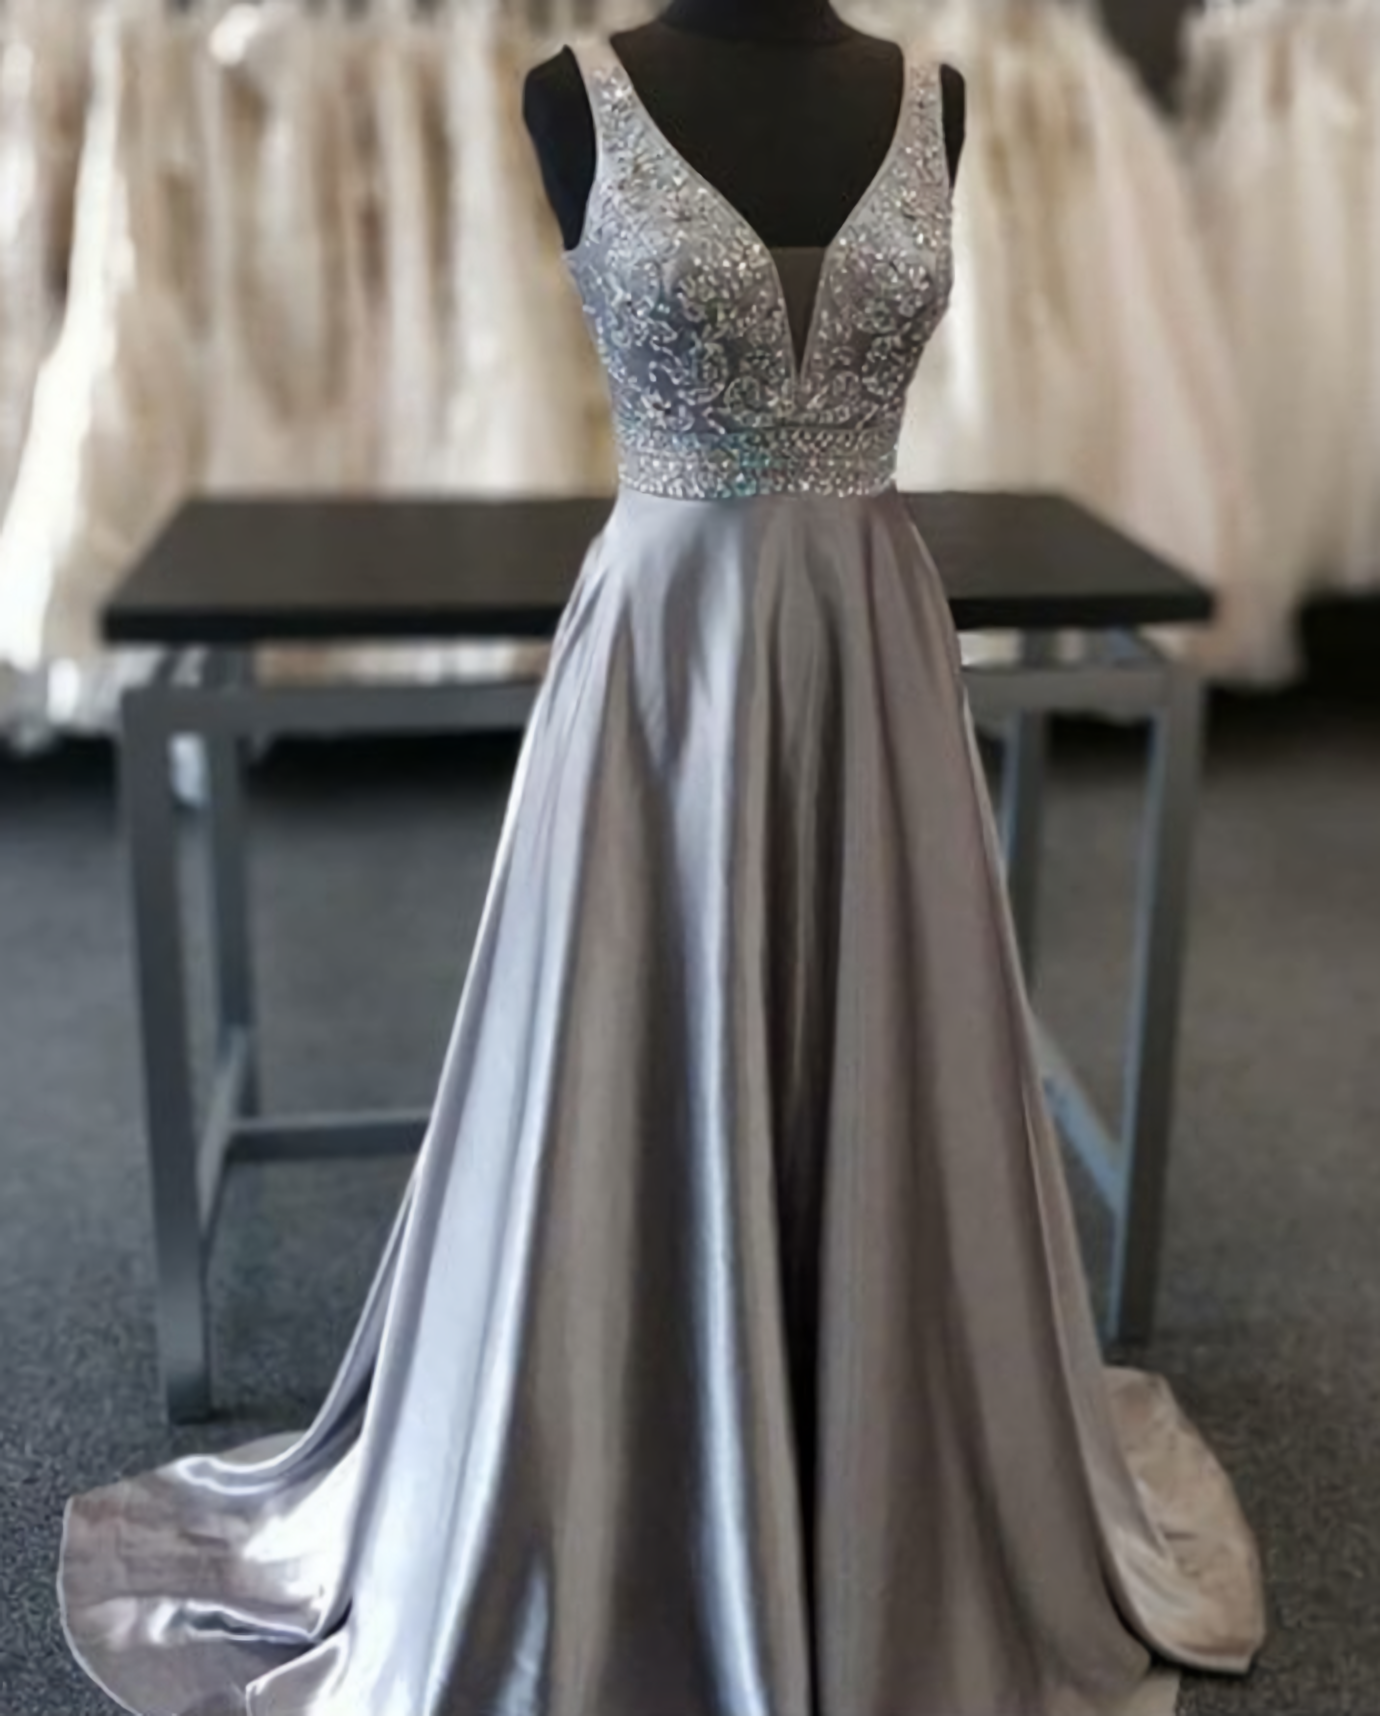 Long Dress Outfit, Beautiful Elegant Silver Grey Prom Dress, Beaded Evening Gowns V Neck Formal Dress, Special Occasion Dress